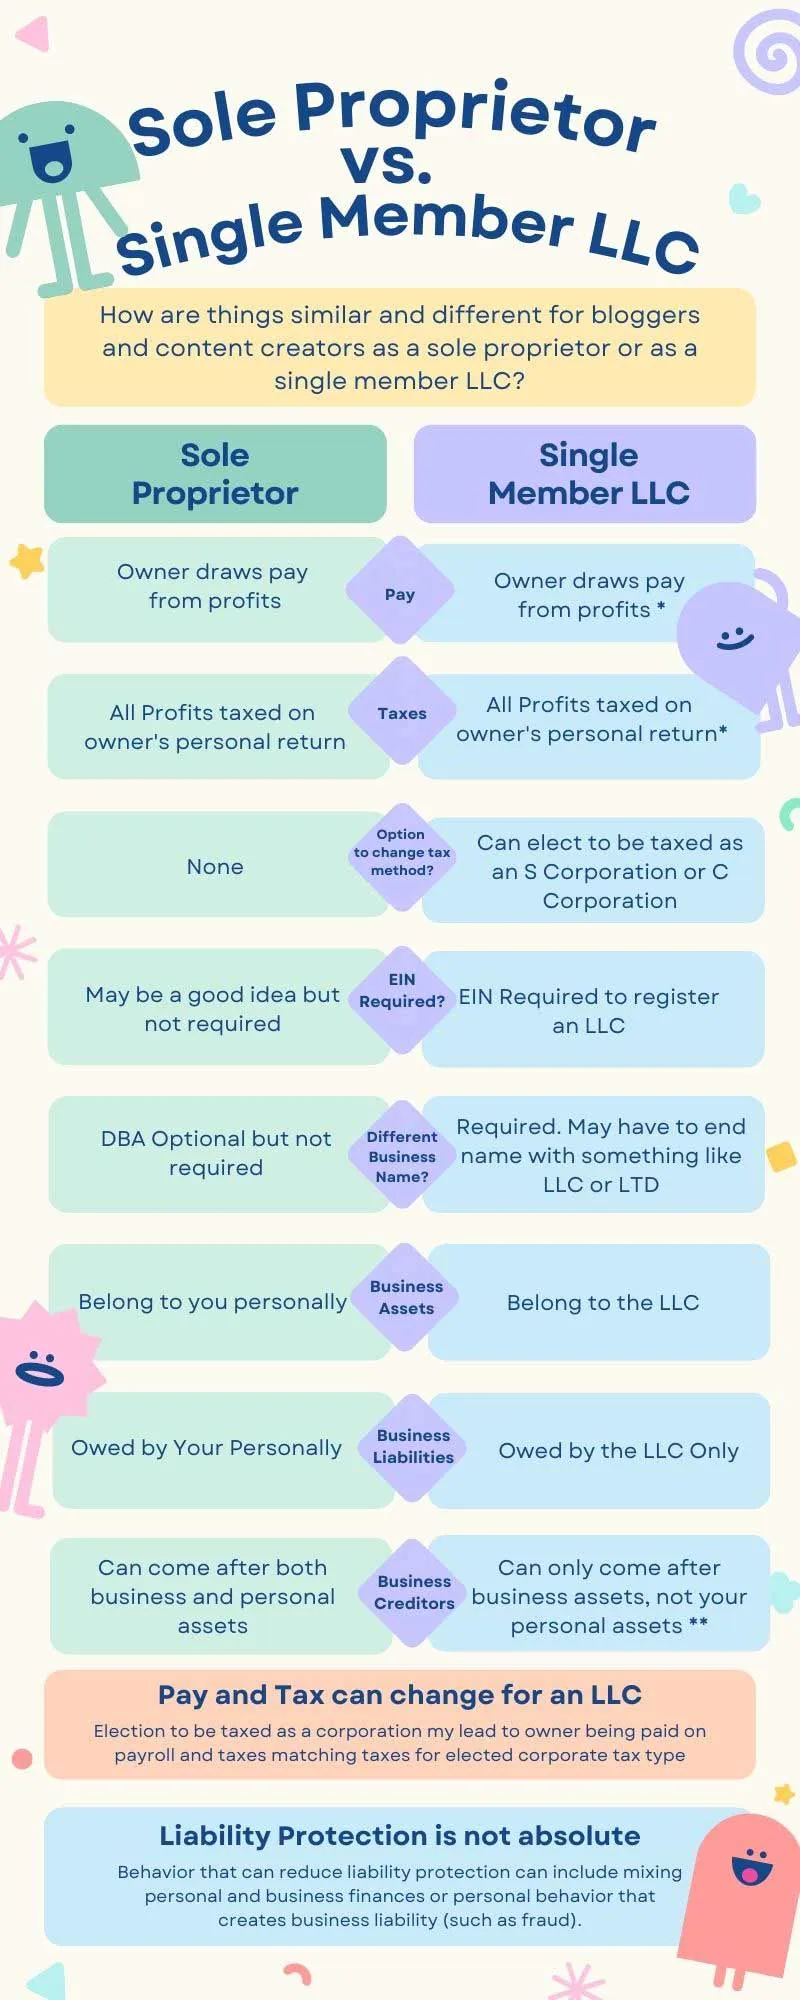 Infographic that compares an LLC to a Sole Proprietorship, looking at pay, taxes, if EIN is required, and how assets, liabilities and creditors work.